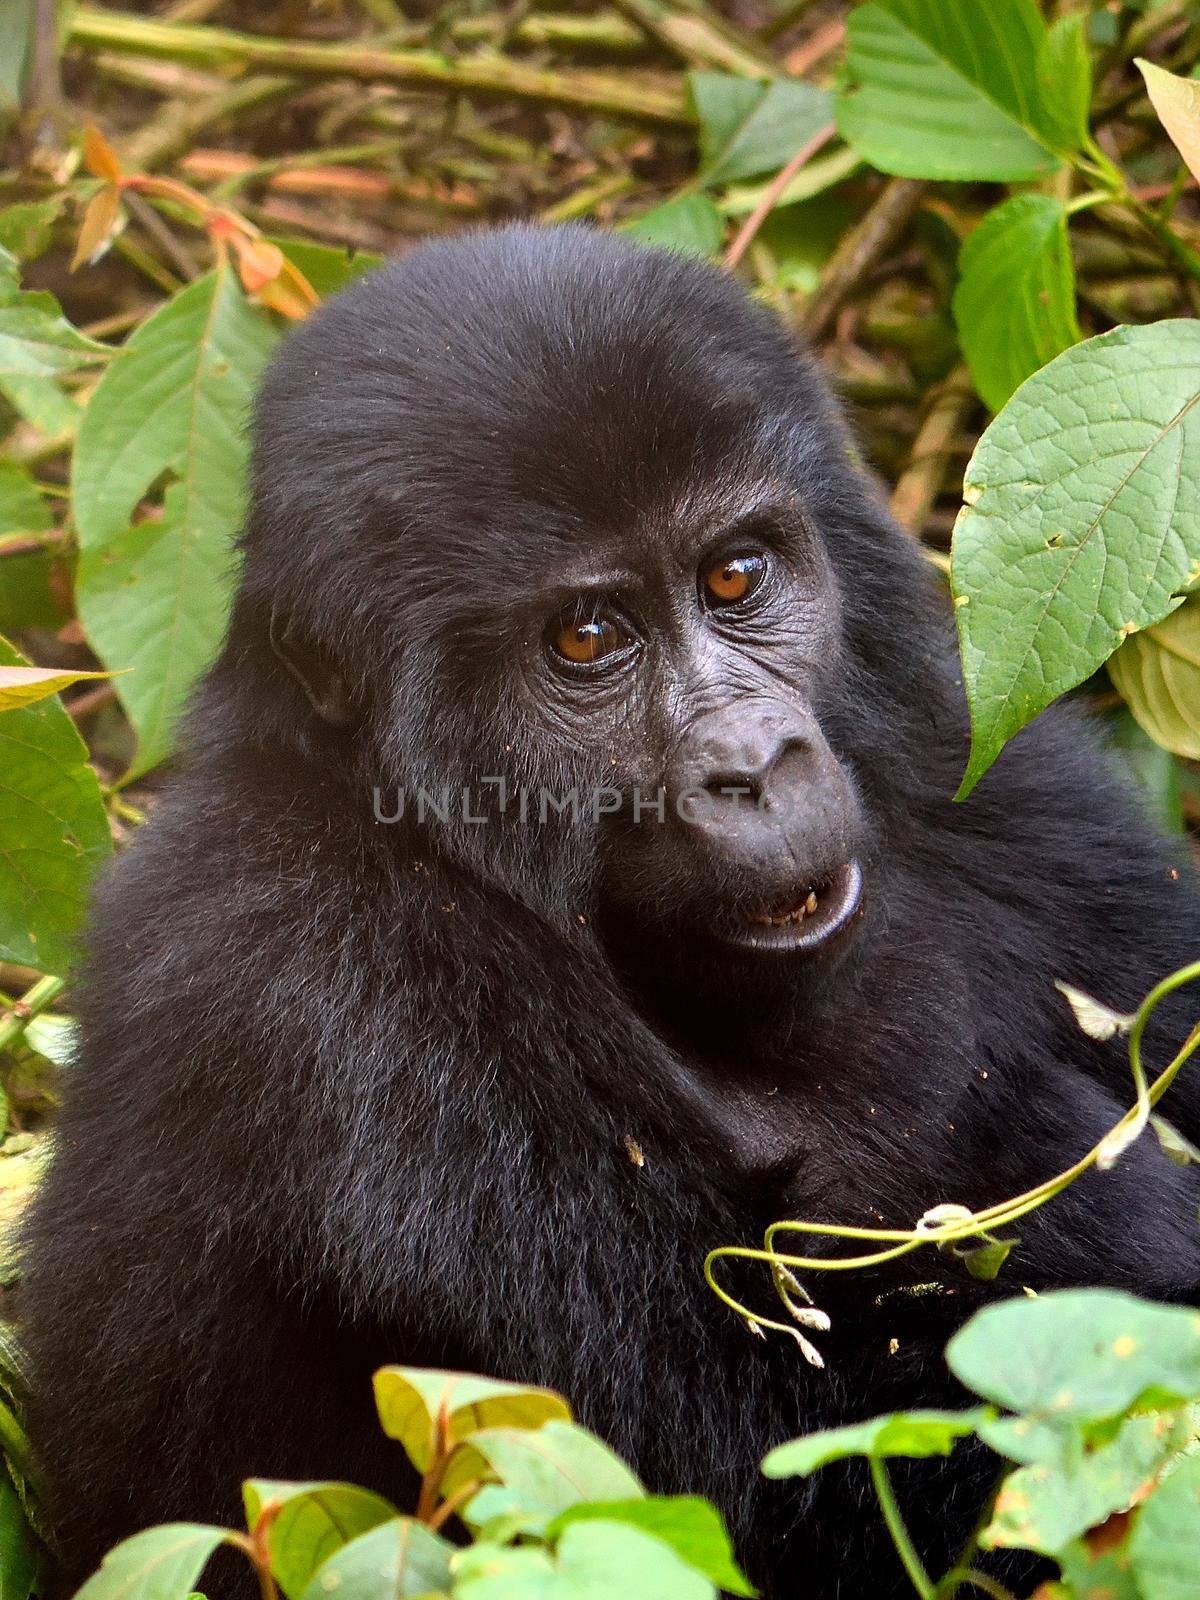 A baby mountain gorilla feeds in Bwindi Impenetrable Forest. by silentstock639